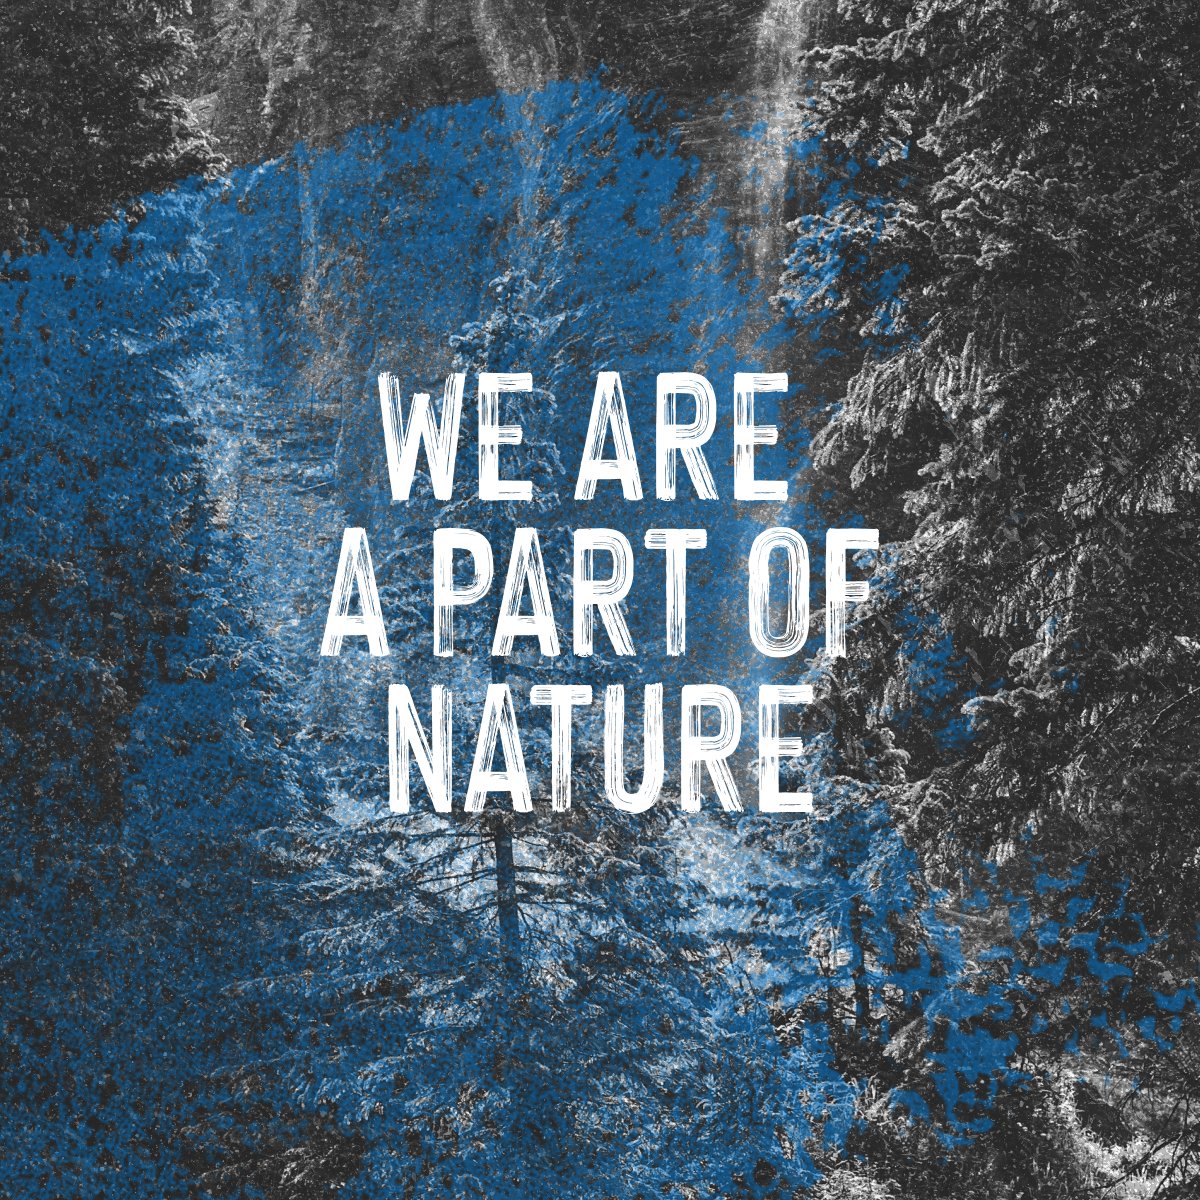 Without nature we die. A simple story. We are not separate from nature. We cannot control it, exploit it or conquer it. So let's start telling a better story. We are part of nature and need to protect it. stories.life/chapter/the-na… #storiesforlife #inservicetolife @WEAll_Alliance